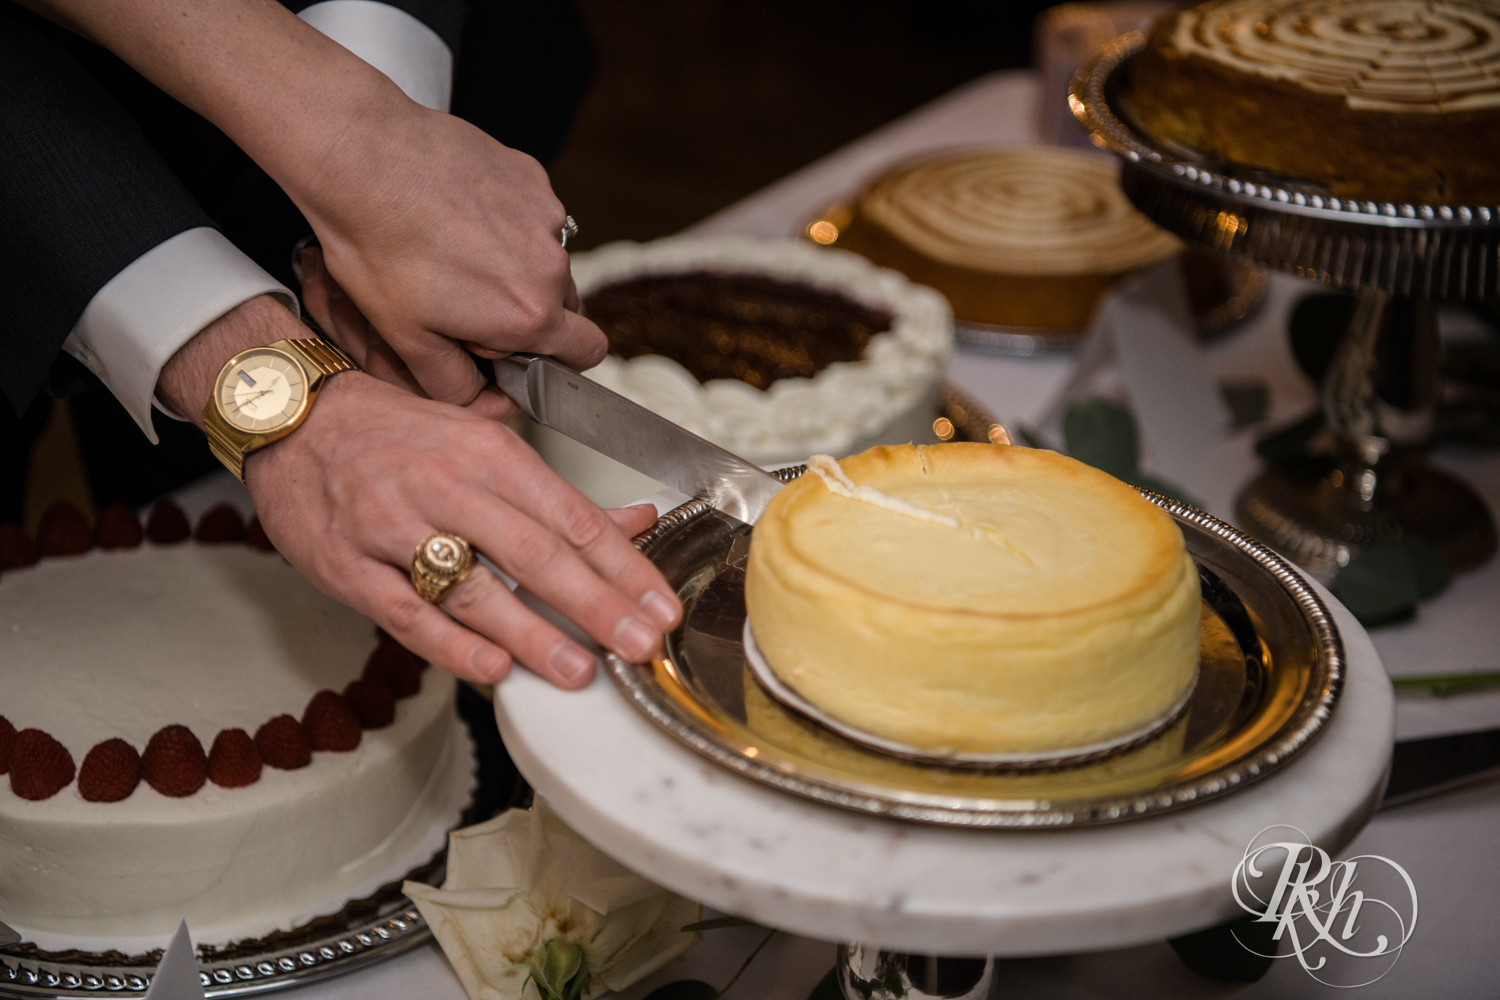 Bride and groom cut cake at wedding reception at the Lumber Exchange Event Center in Minneapolis, Minnesota.